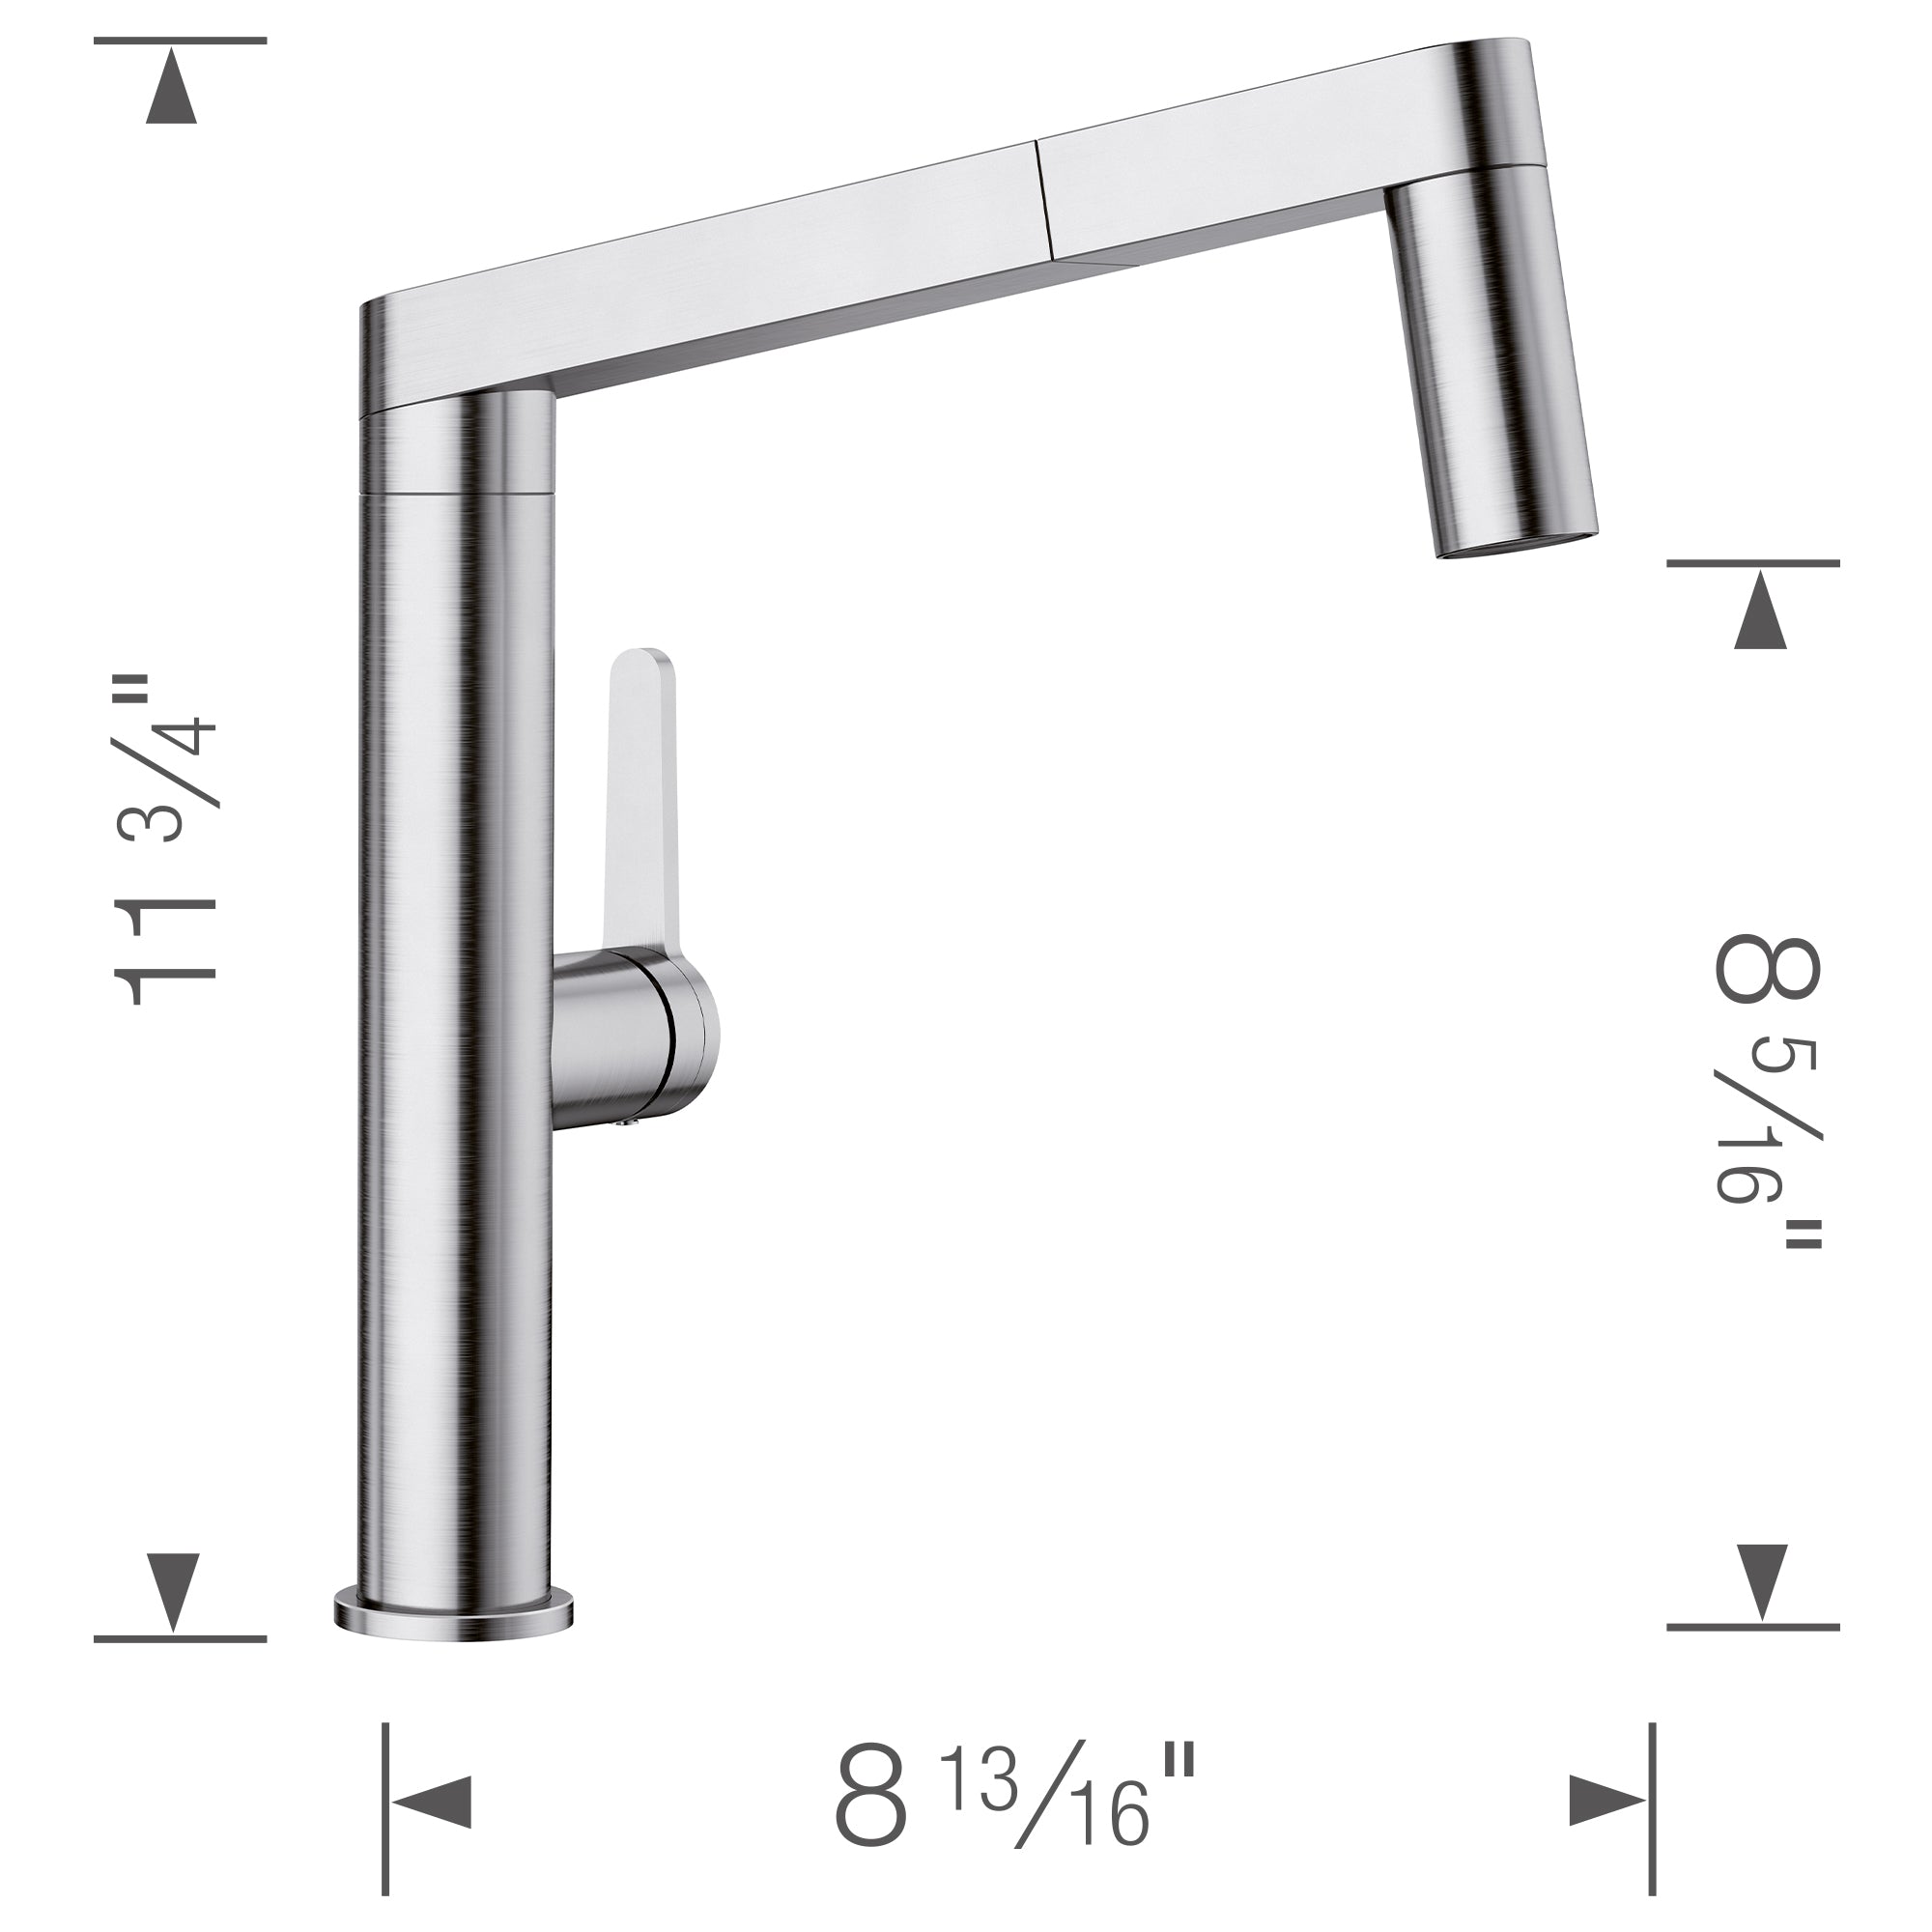 BLANCO Panera Pull-Out Kitchen Faucet in Stainless